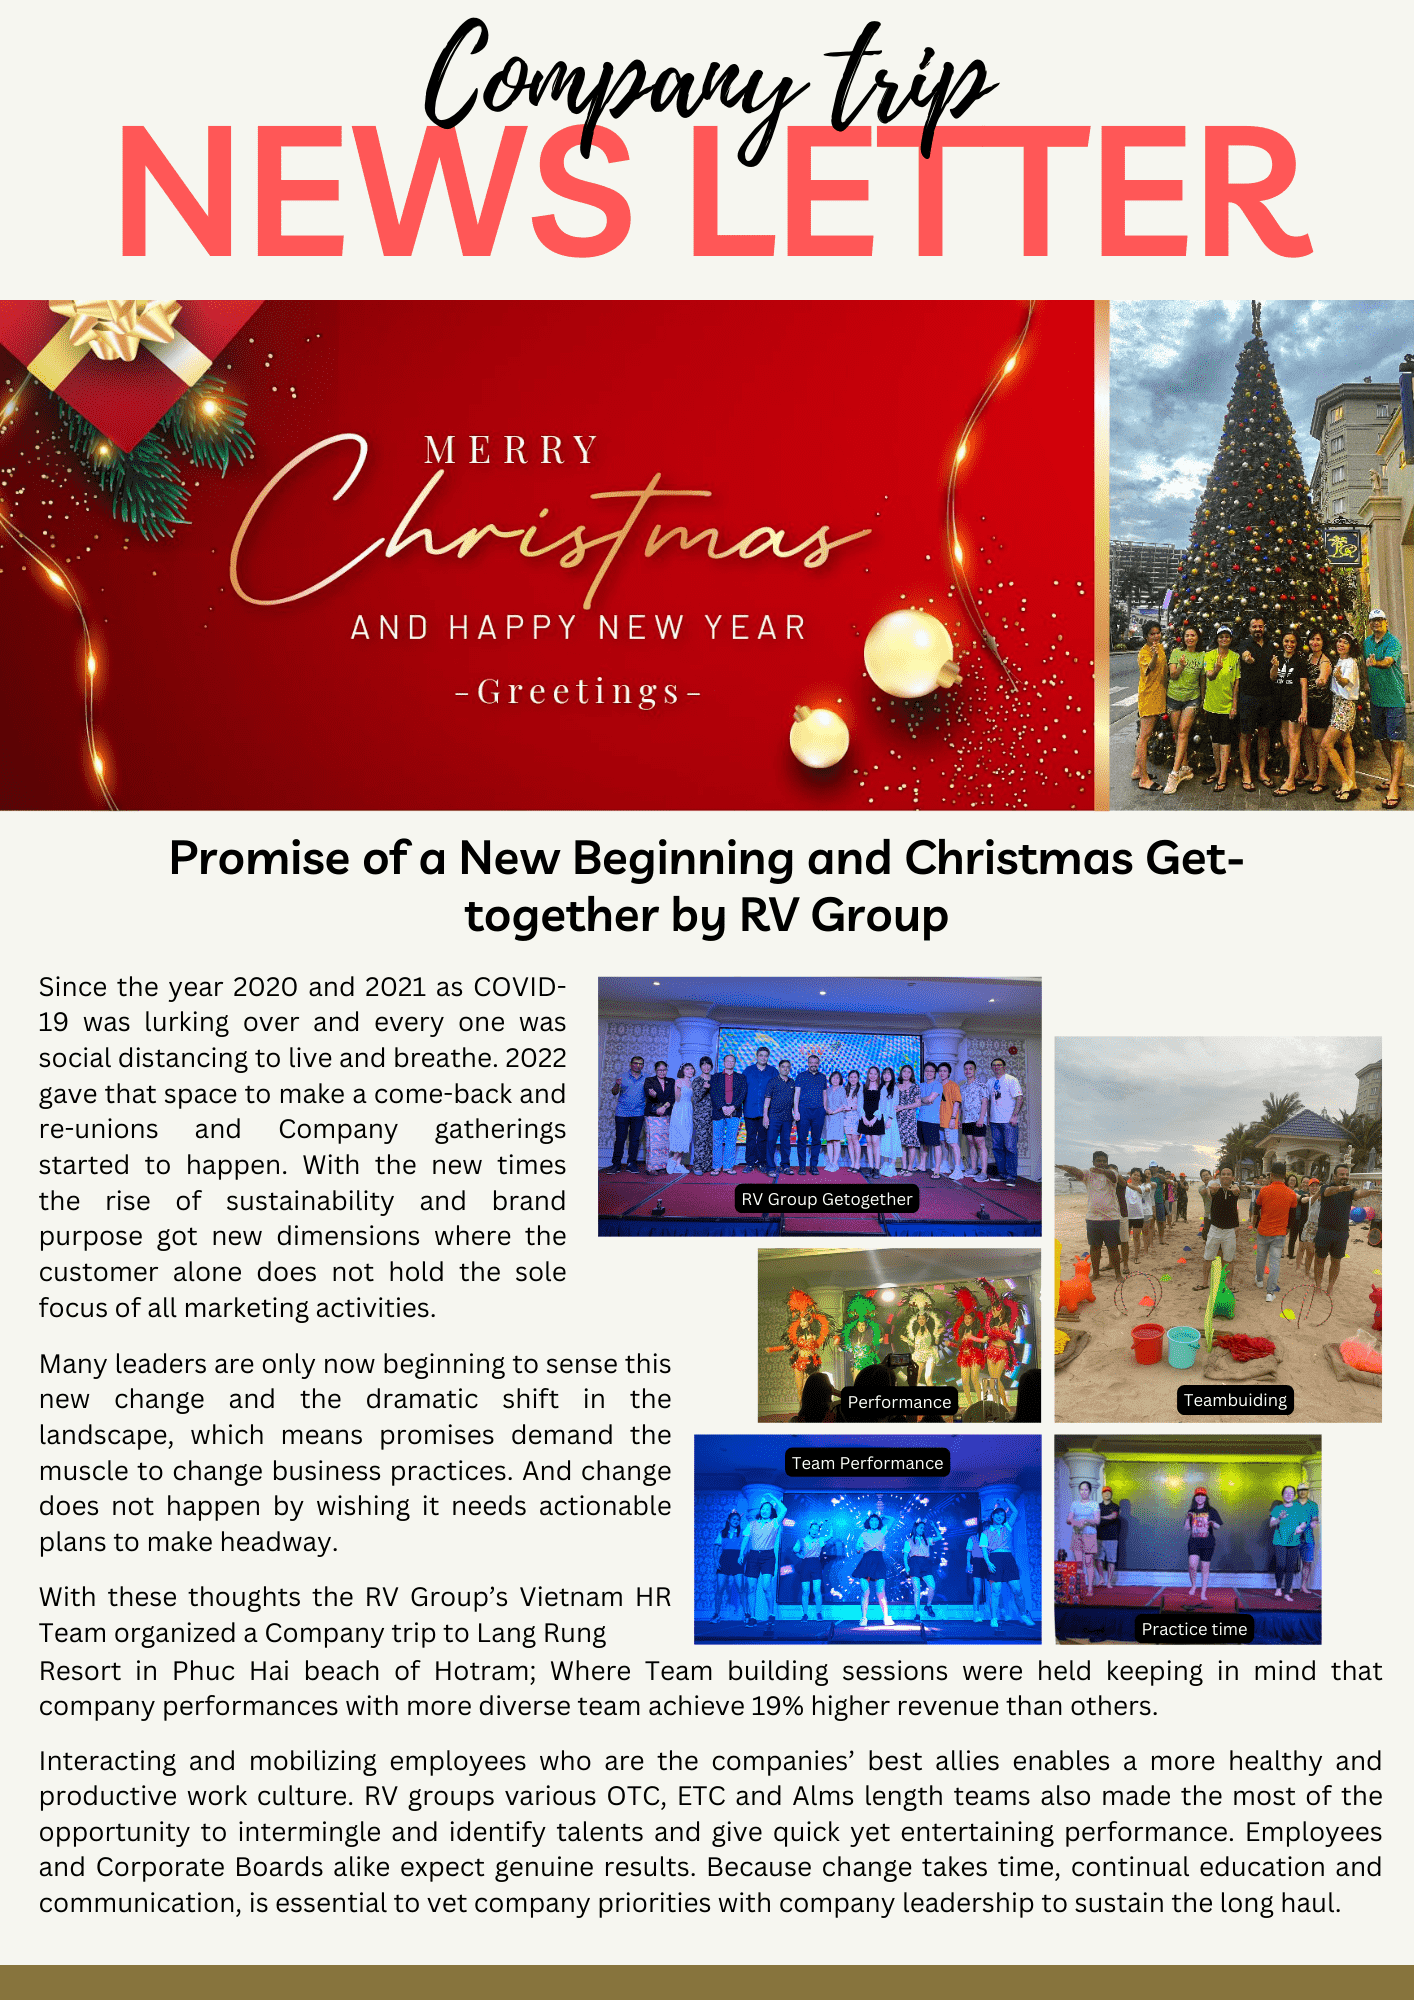 Promise of a New Beginning and Christmas Get-together by RV Group